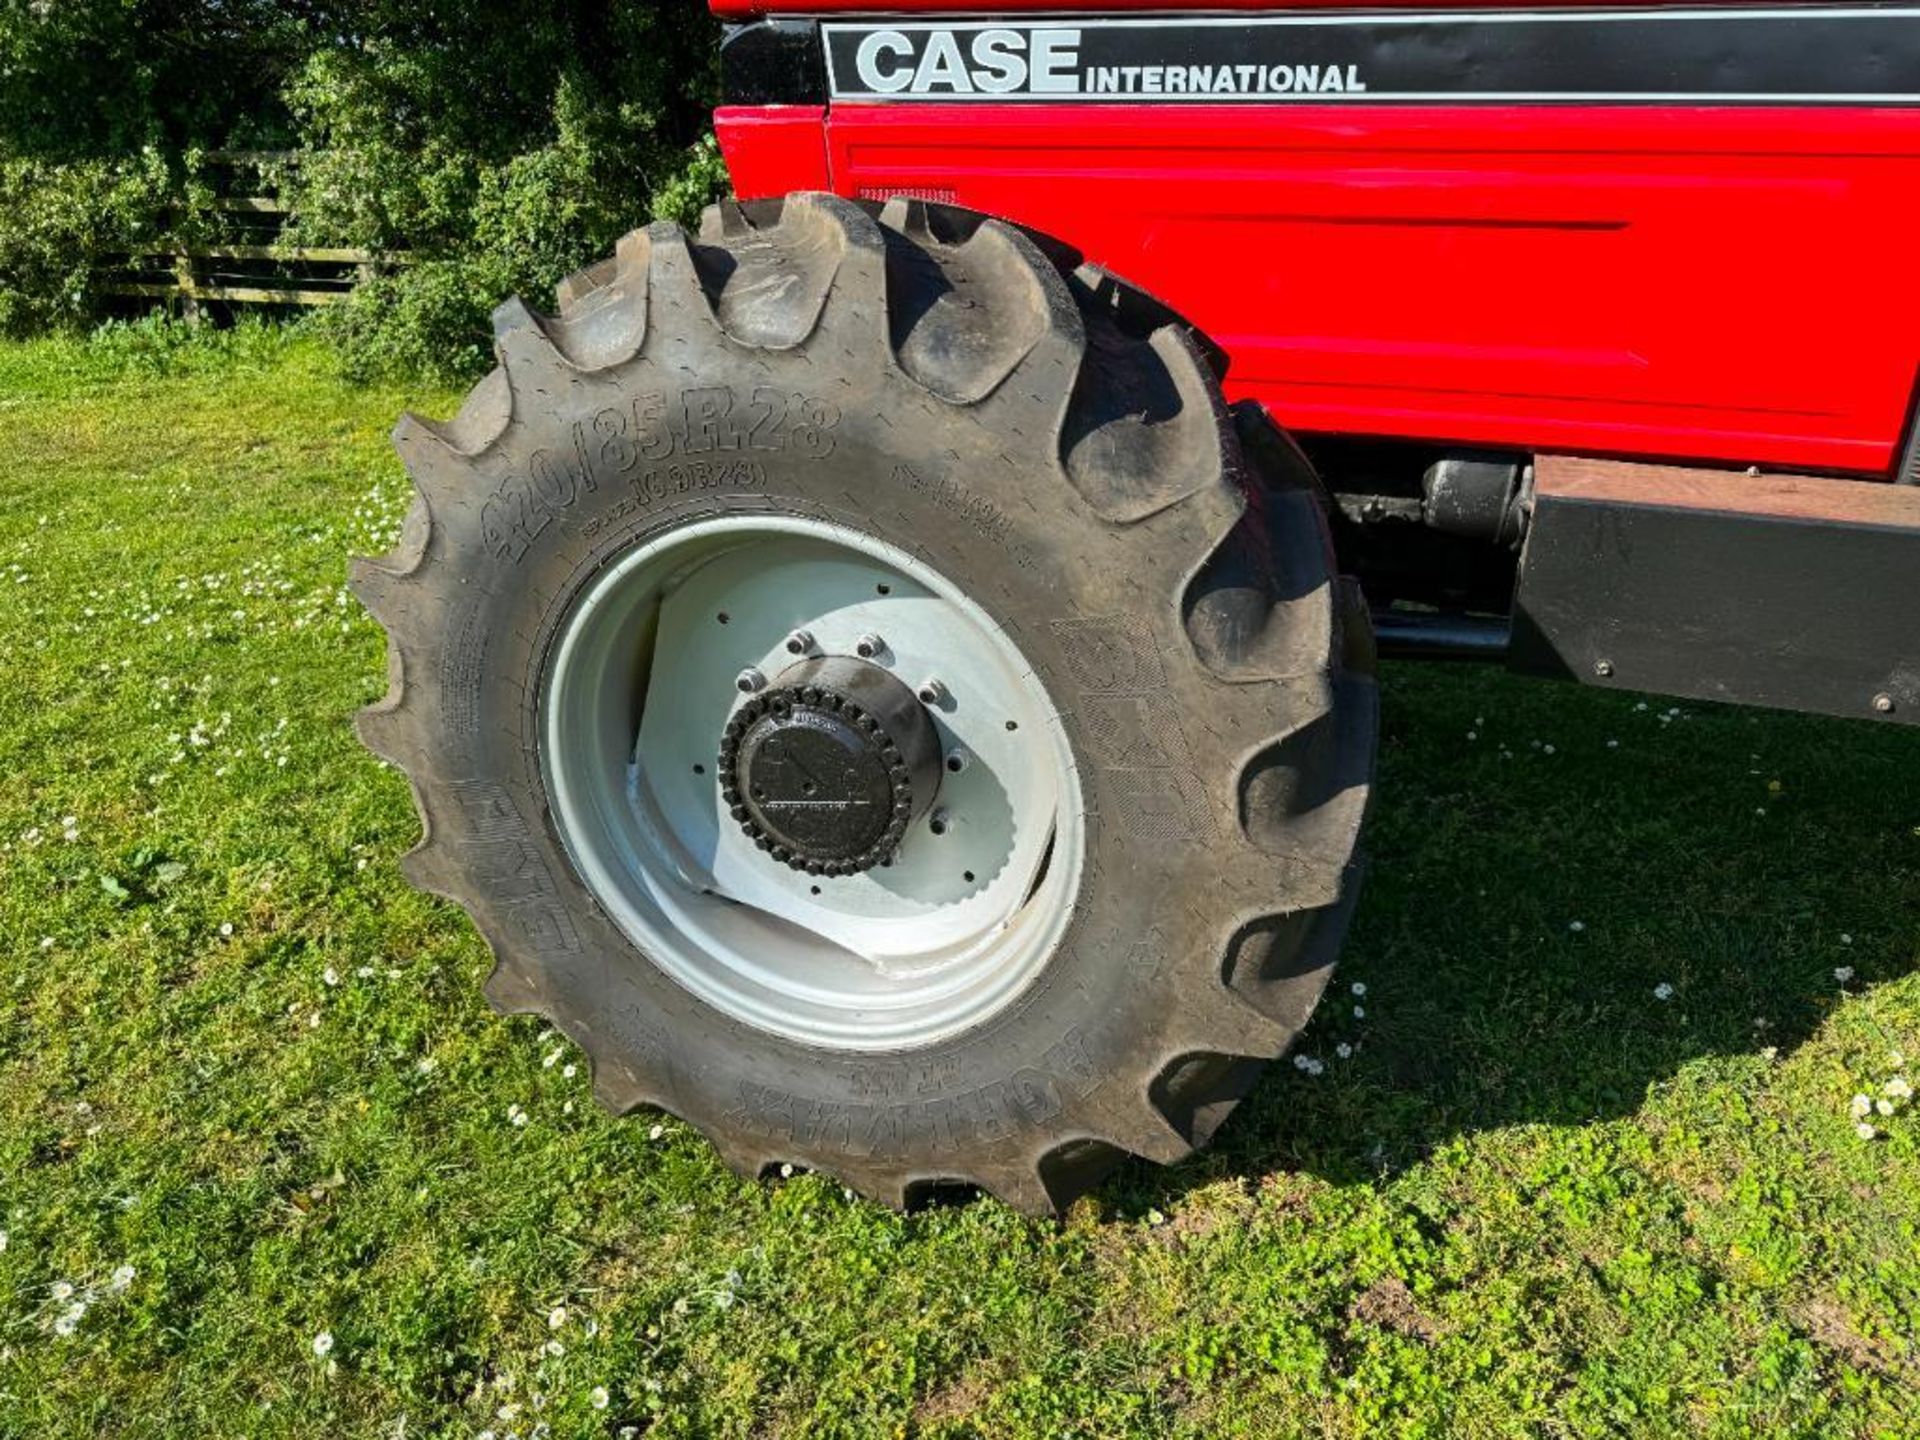 1987 Case International 1455XL 4wd tractor with 14no front wafer weights, 2 manual double acting spo - Image 19 of 26